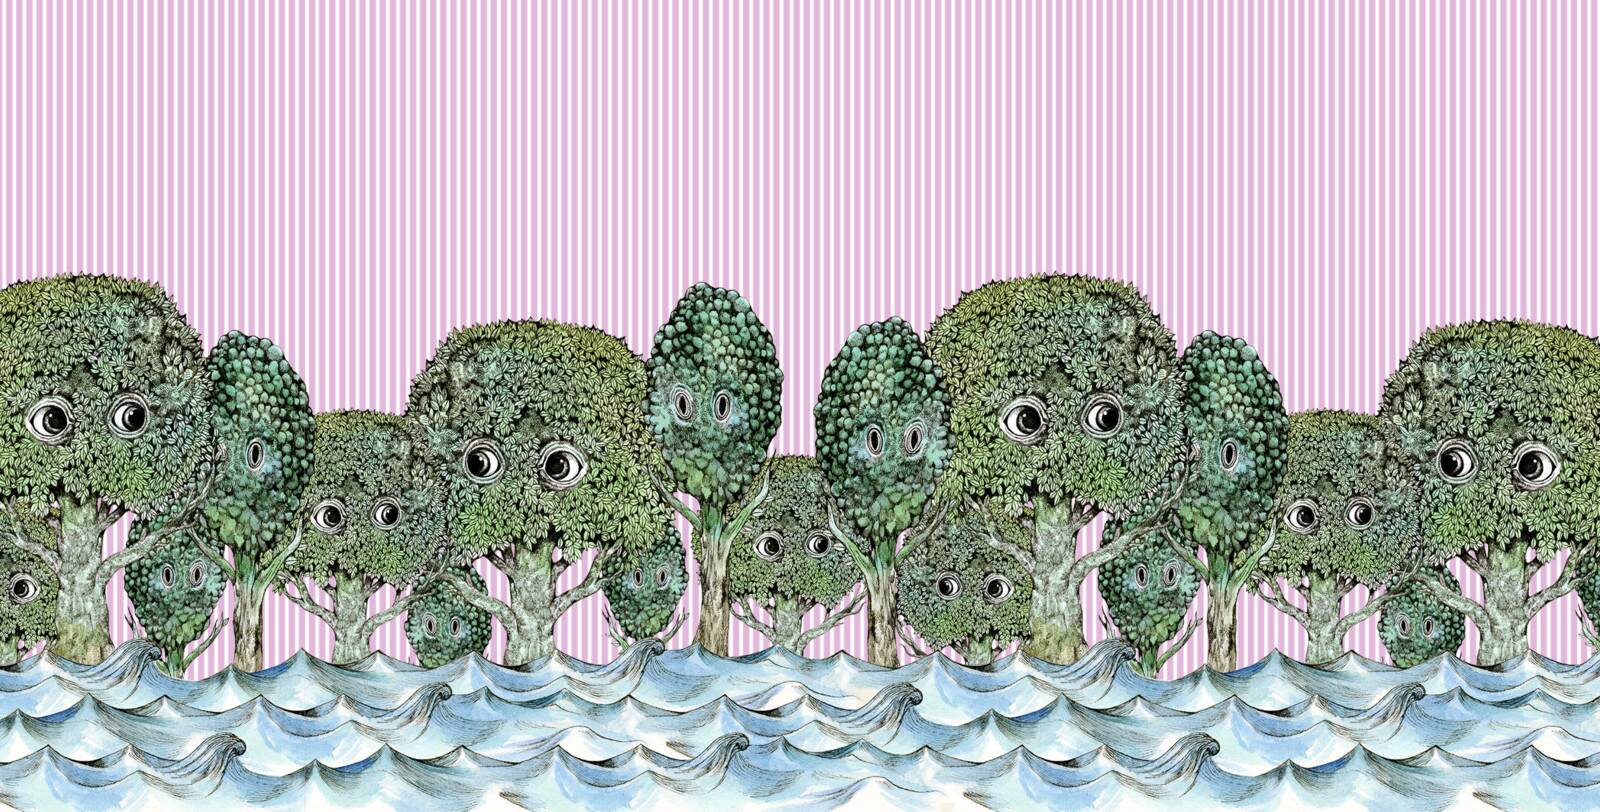 Cult Japanese artist Yuko Higuchi's collaboration for the new Children's Collection